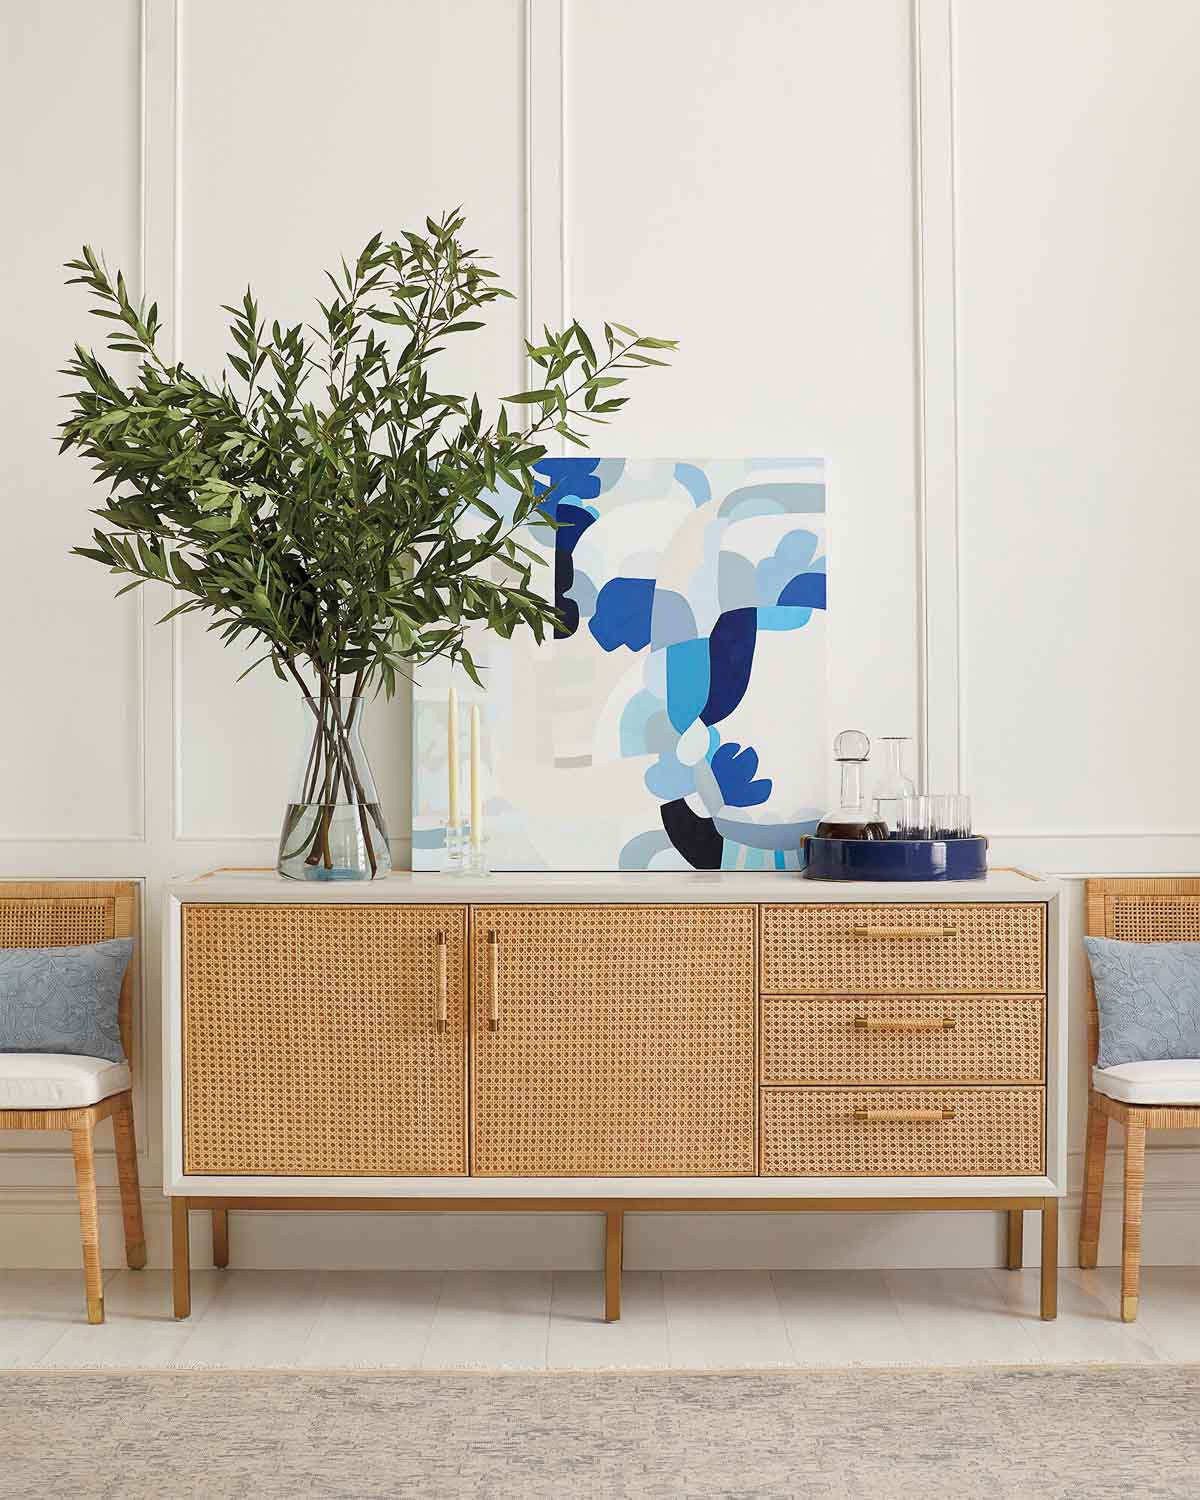 Sideboard with art and vase with greenery as dining room wall decor